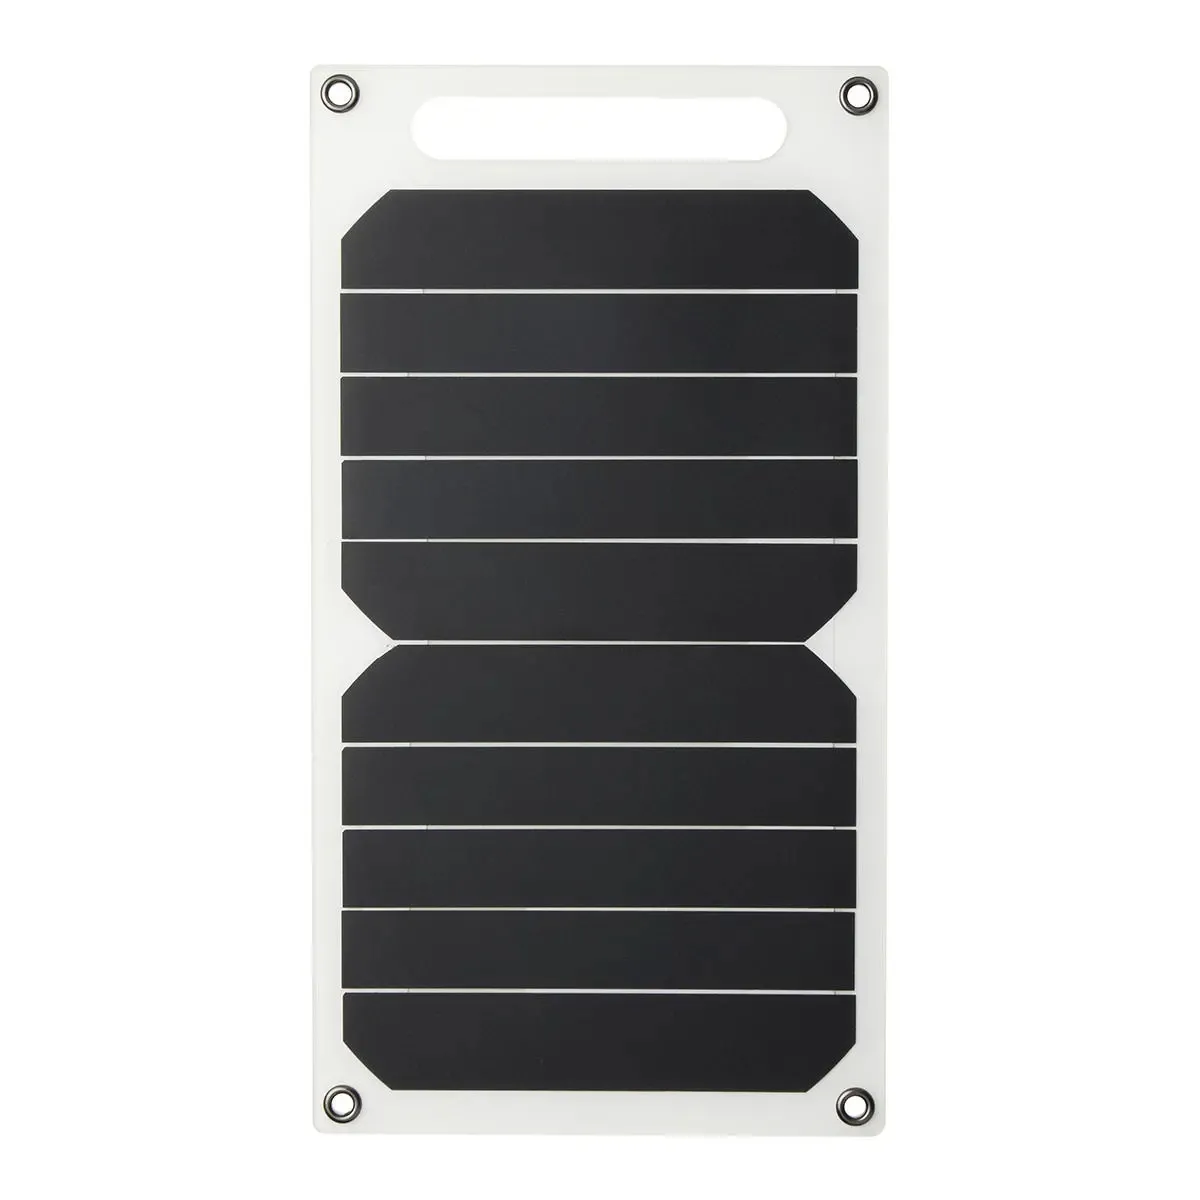 6V 10W 1.7A Portable Solar Panel USB Charging Board Charger - Type 2